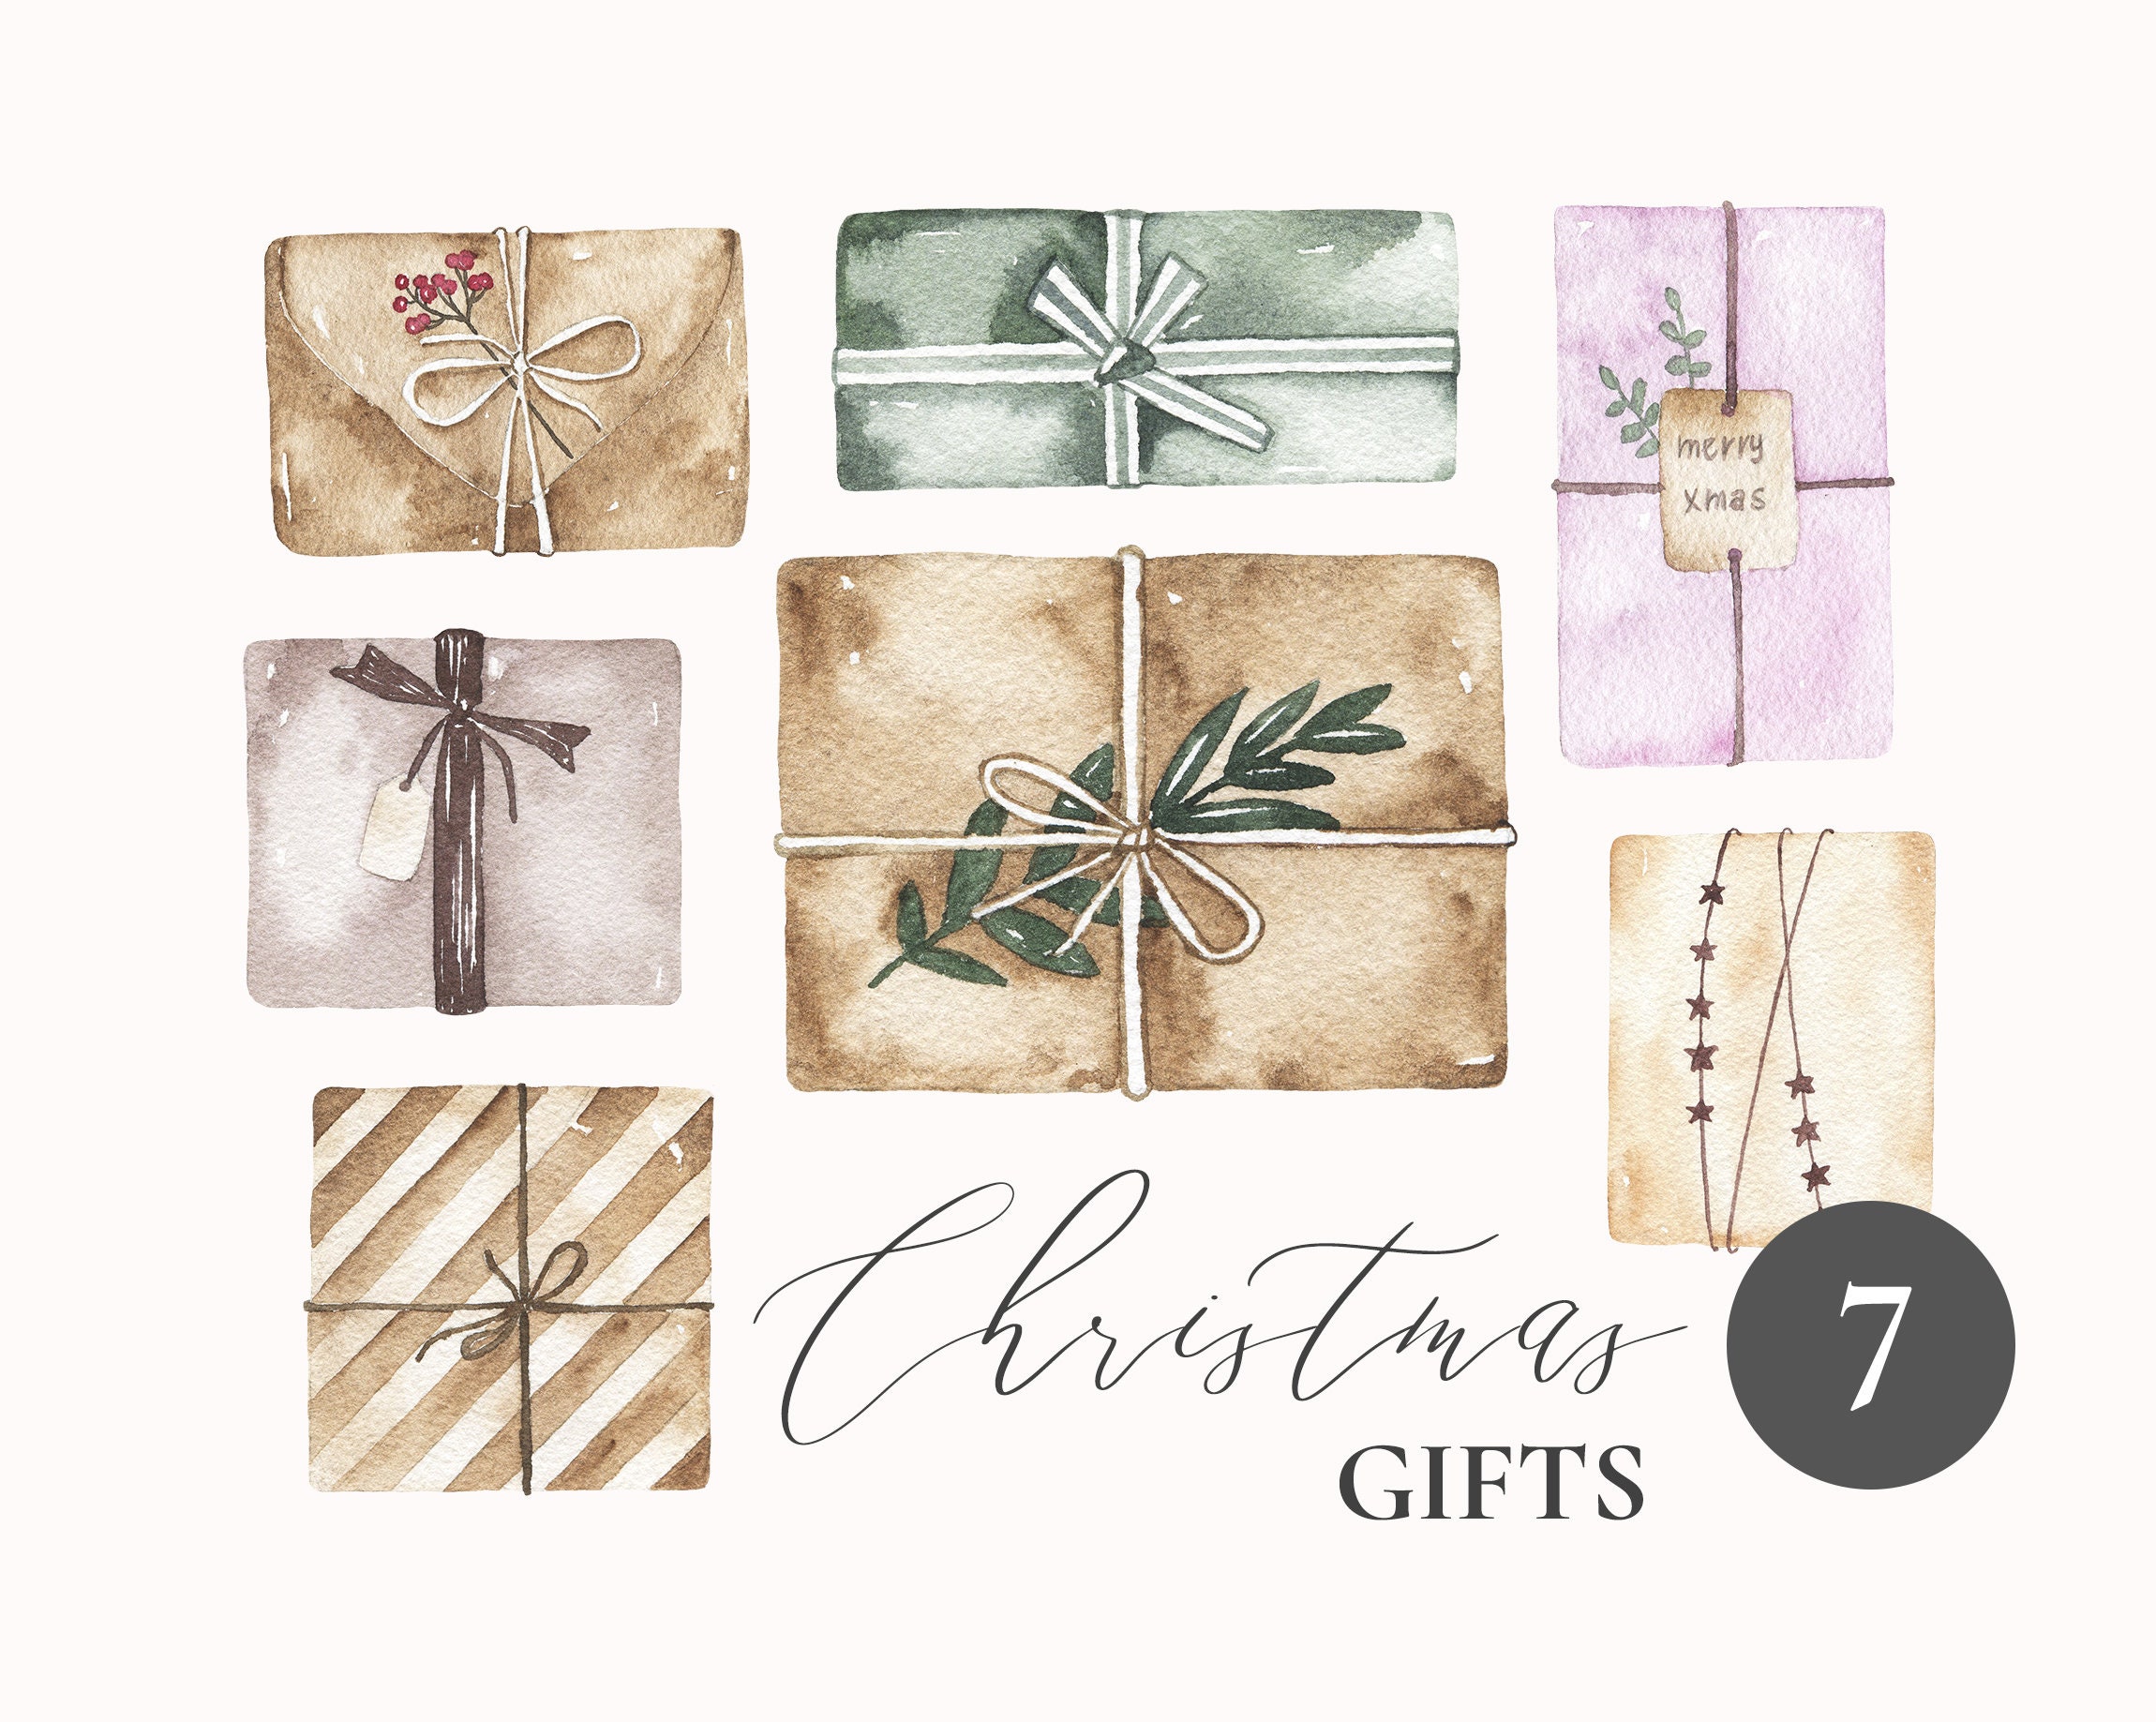 Watercolor Handpainted Set Of Gift Boxes And Presents In Craft